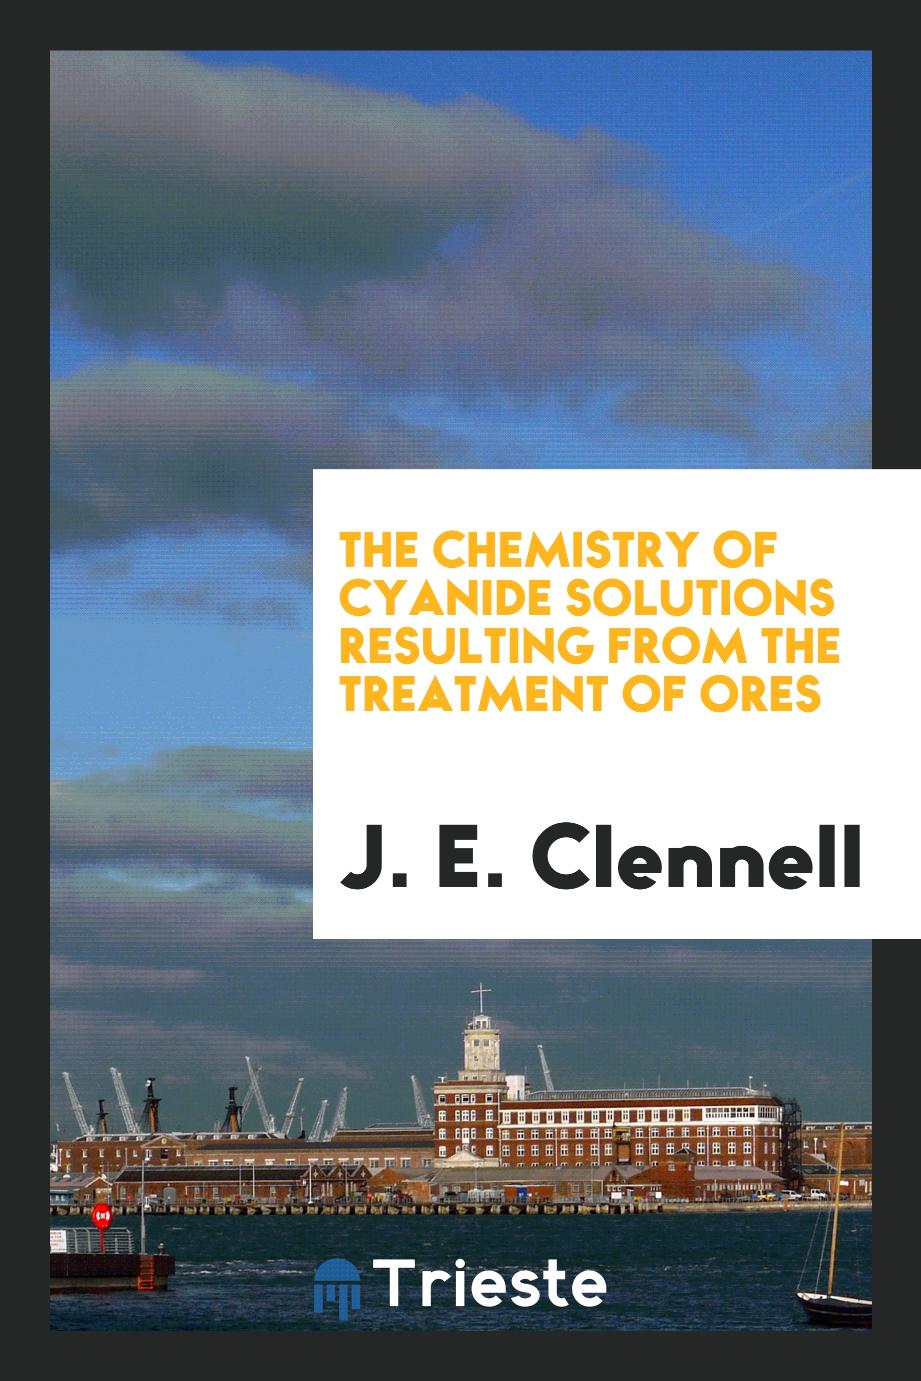 The chemistry of cyanide solutions resulting from the treatment of ores